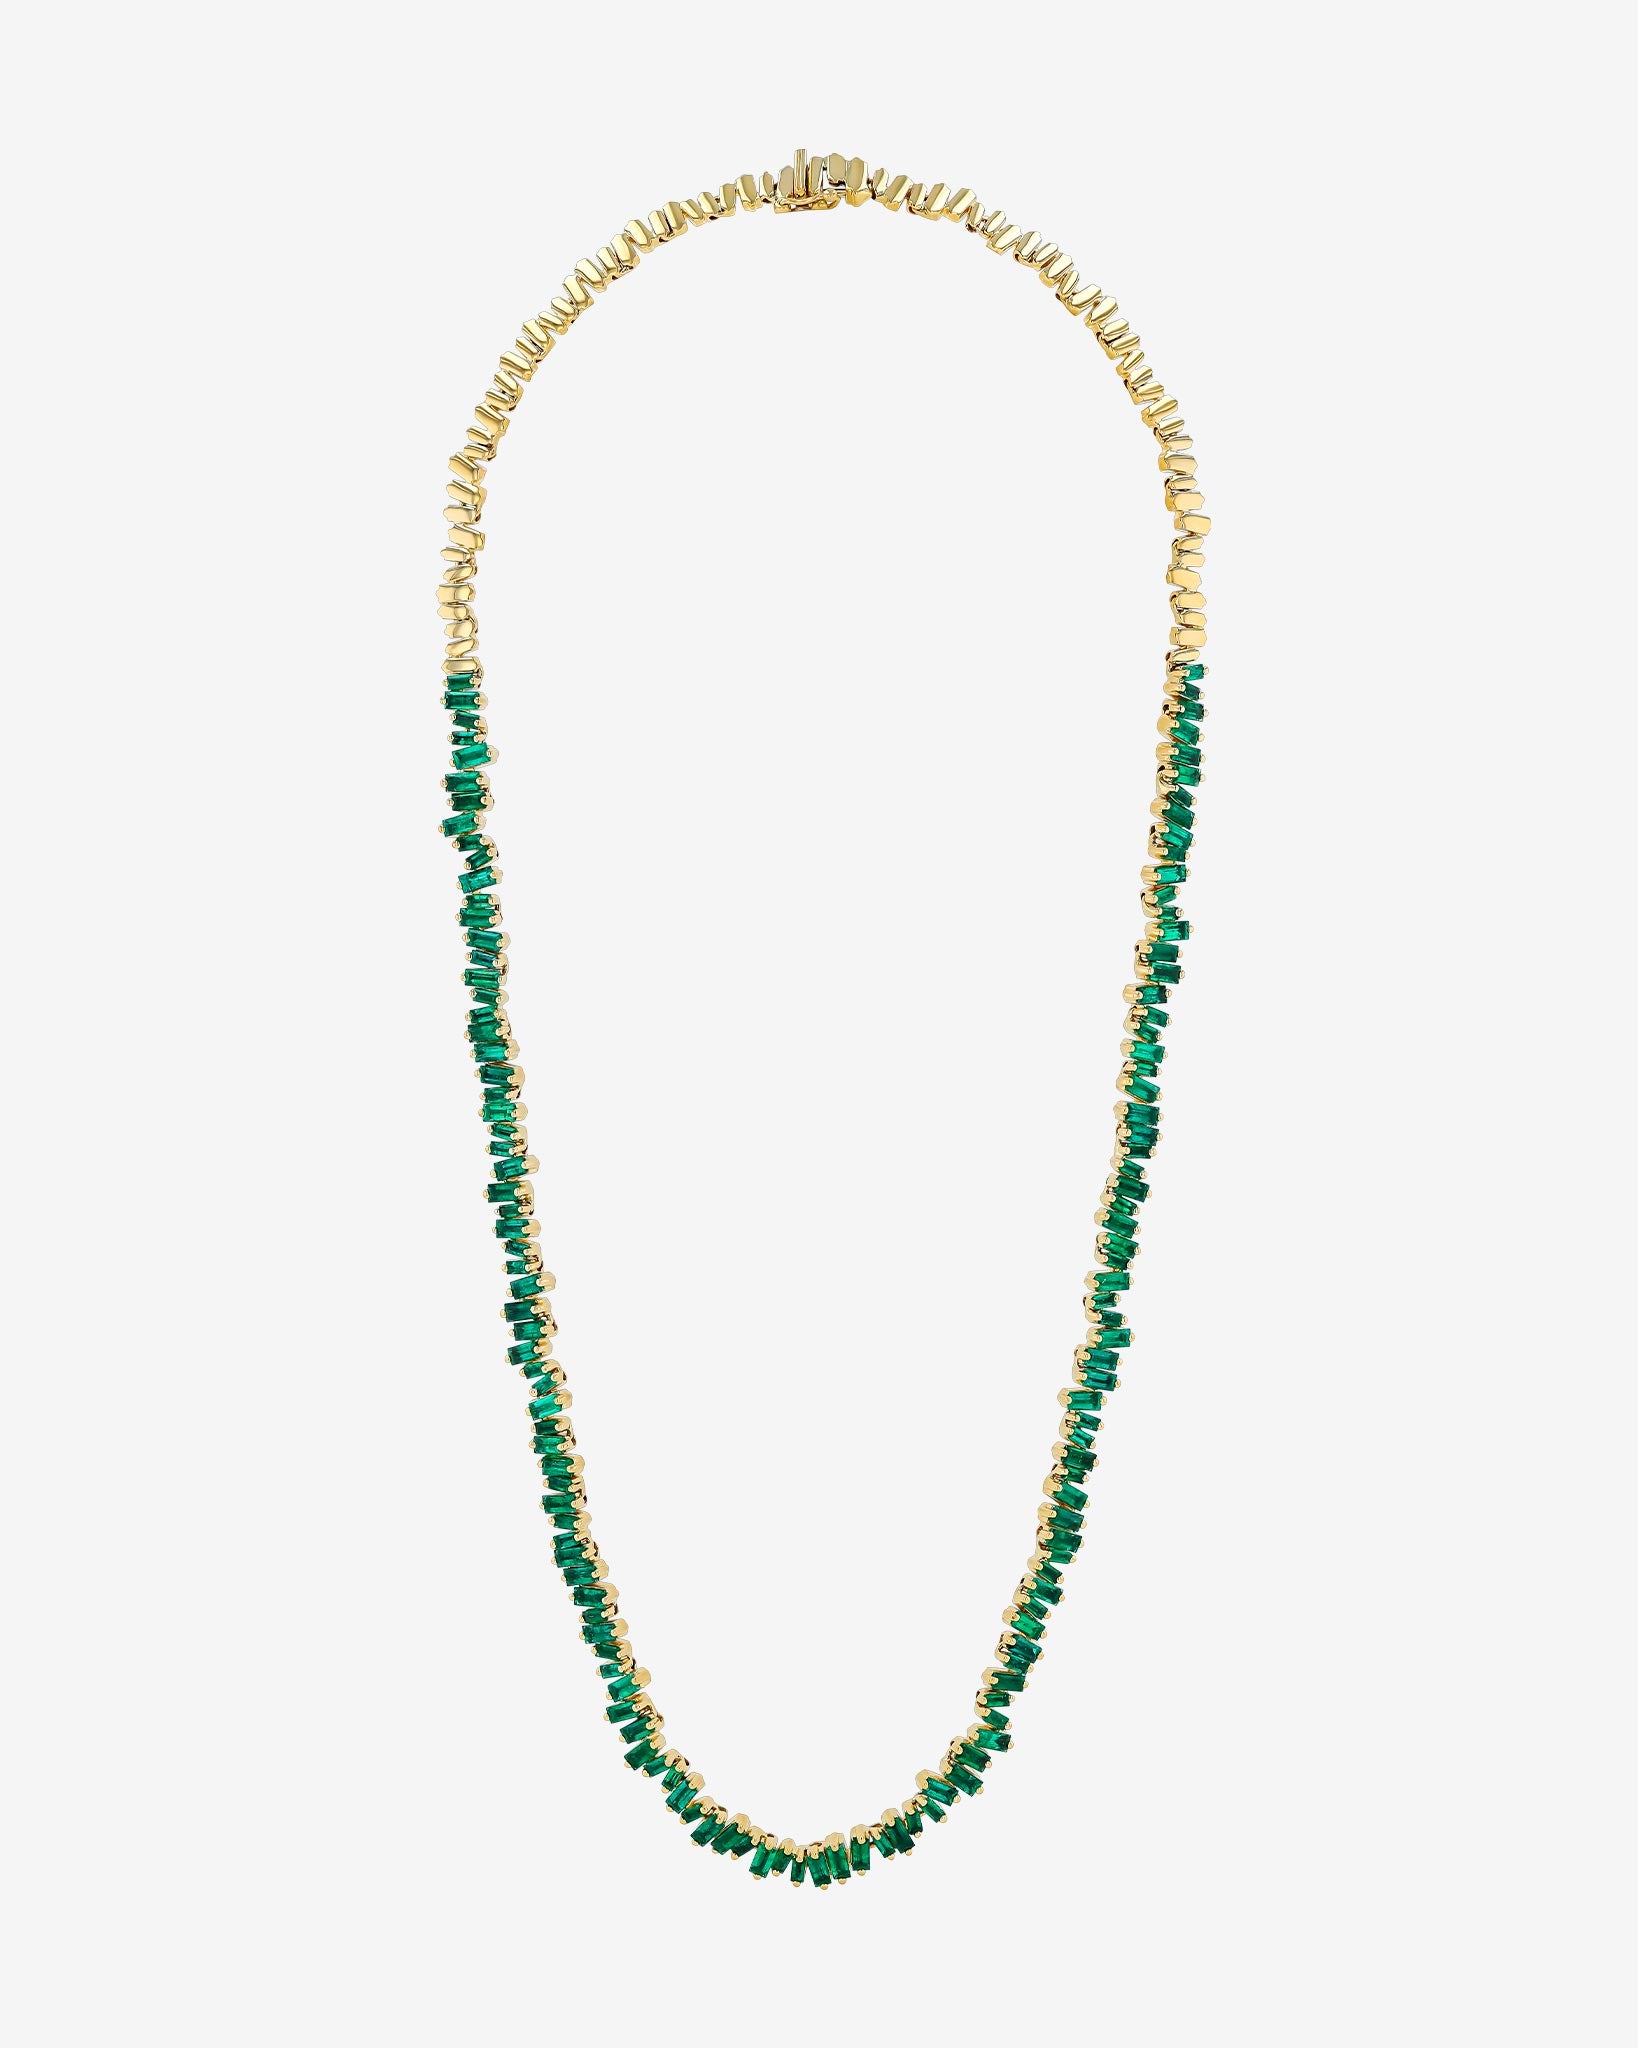 Suzanne Kalan Bold Emerald Tennis Necklace in 18k yellow gold